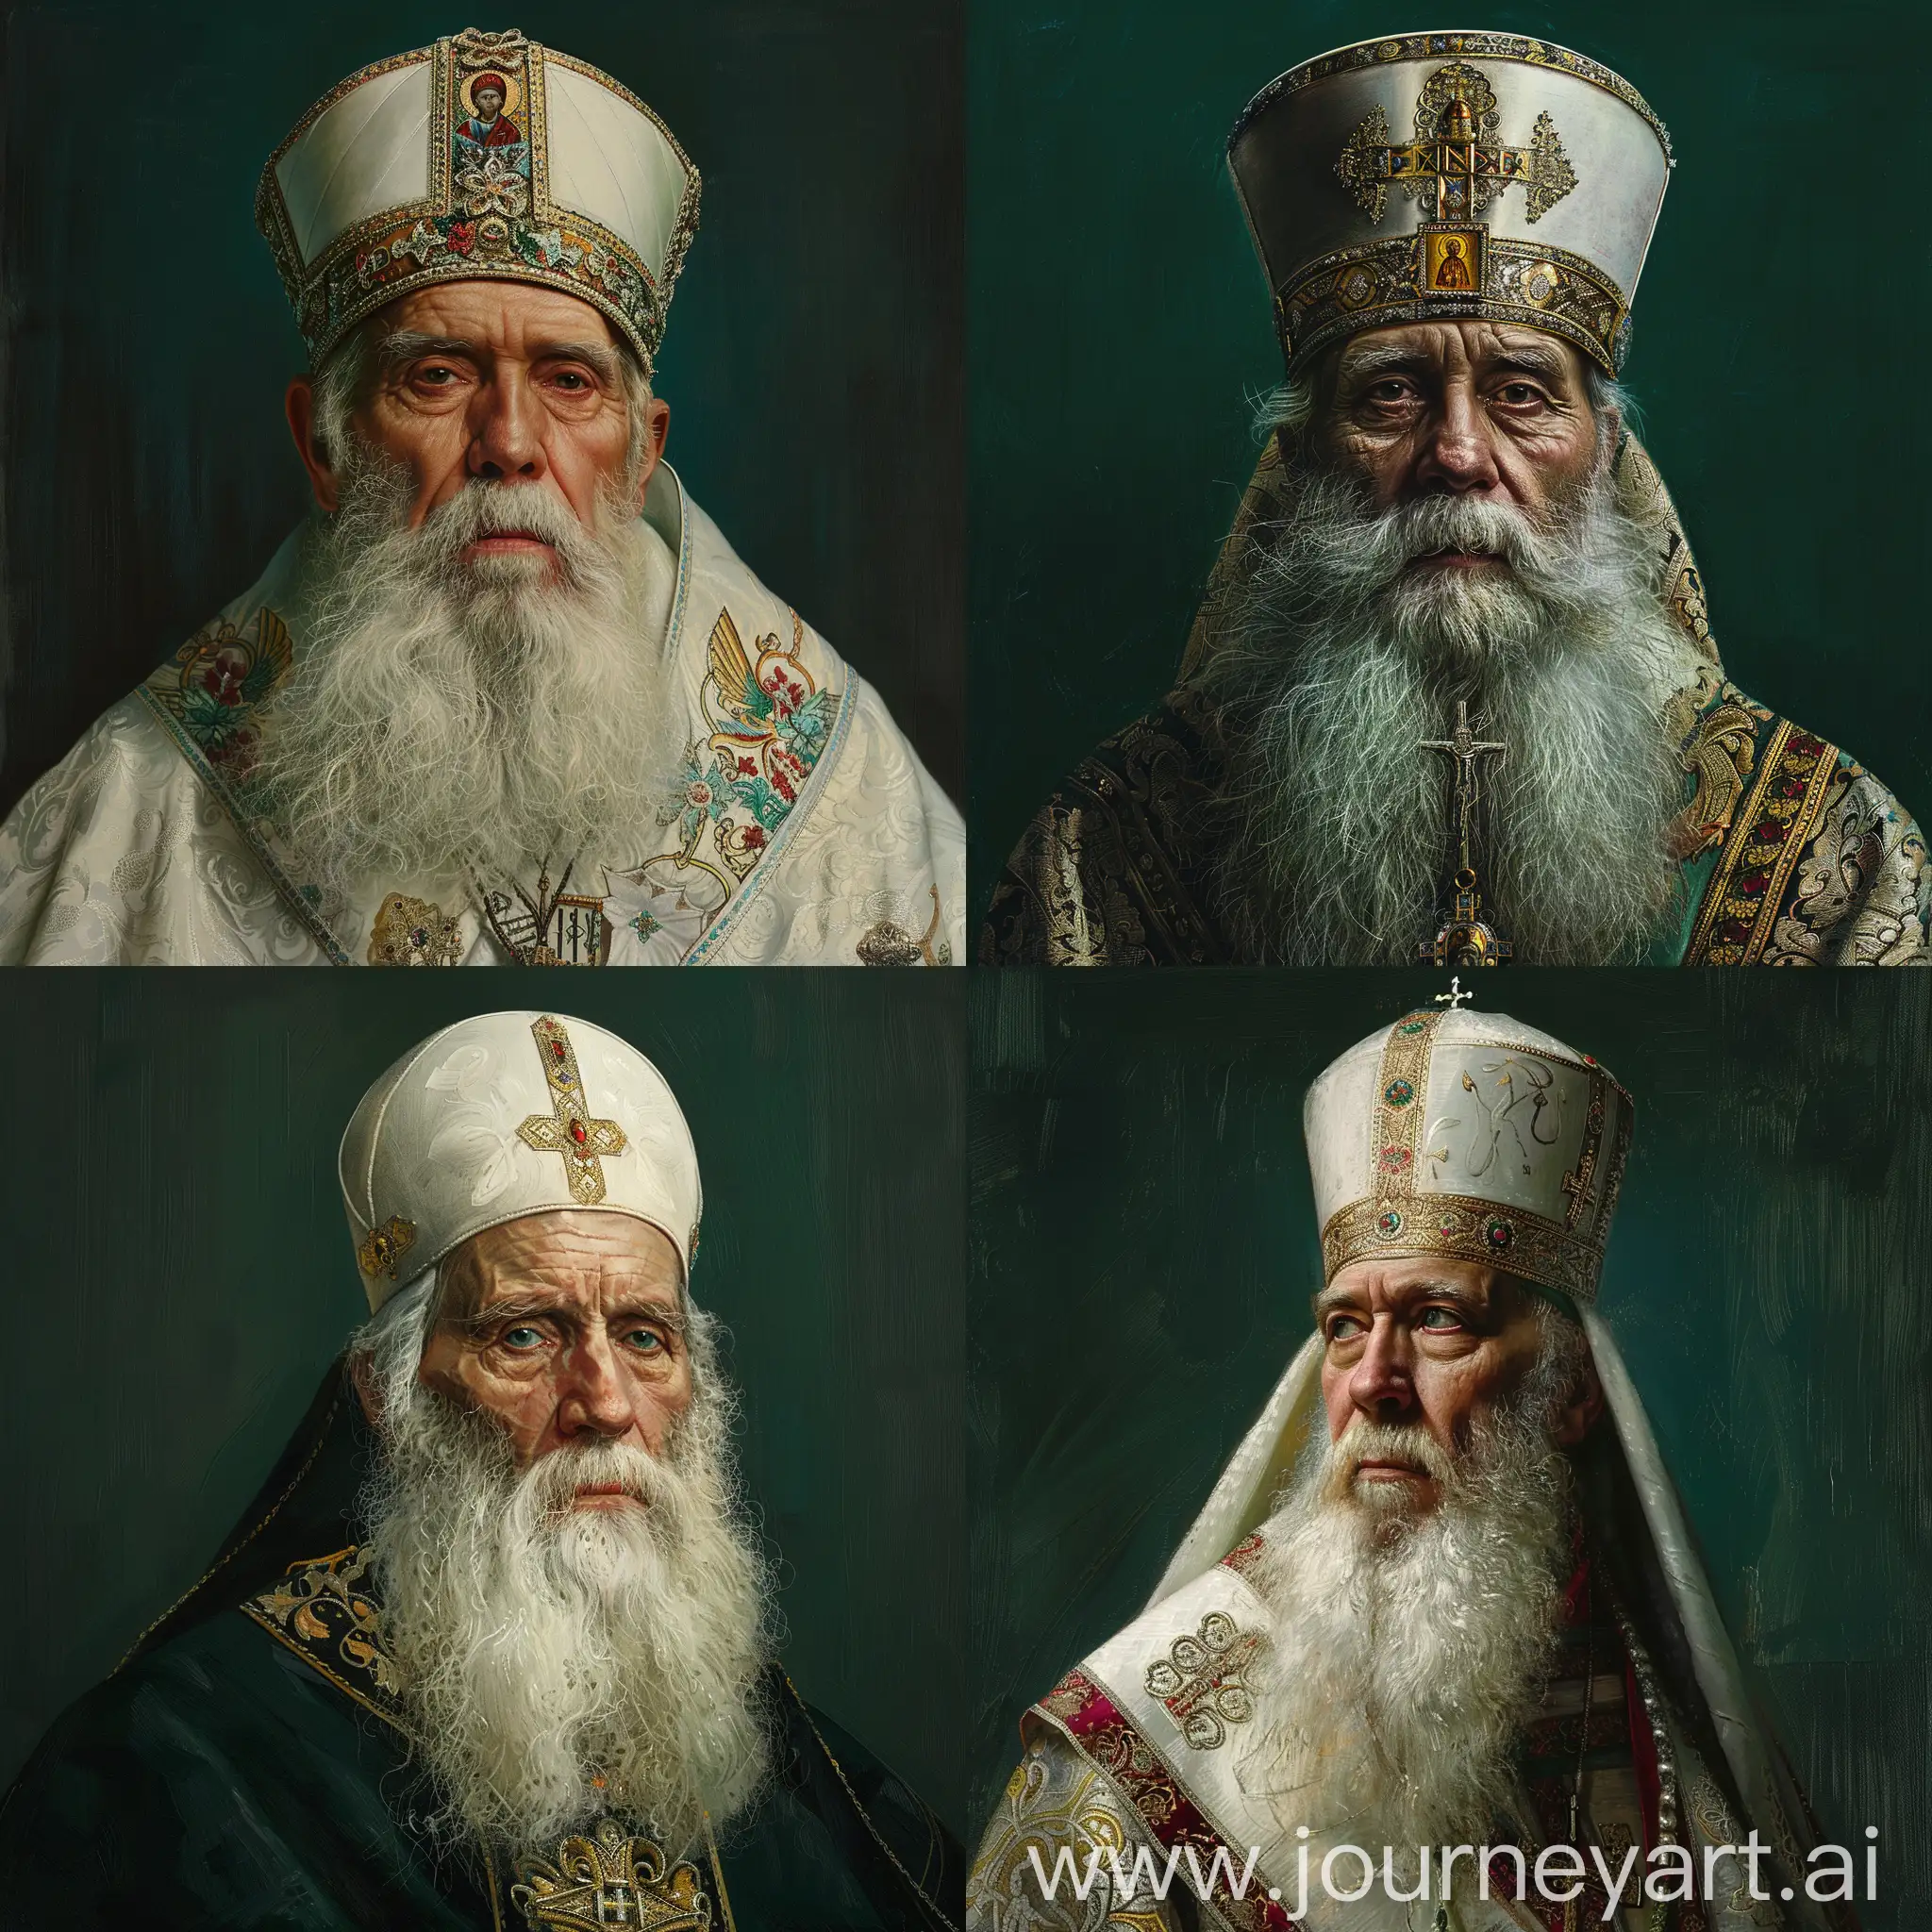 Portrait of patriarch Tikhon of the Russian Orthodox Church. The background is dark green.